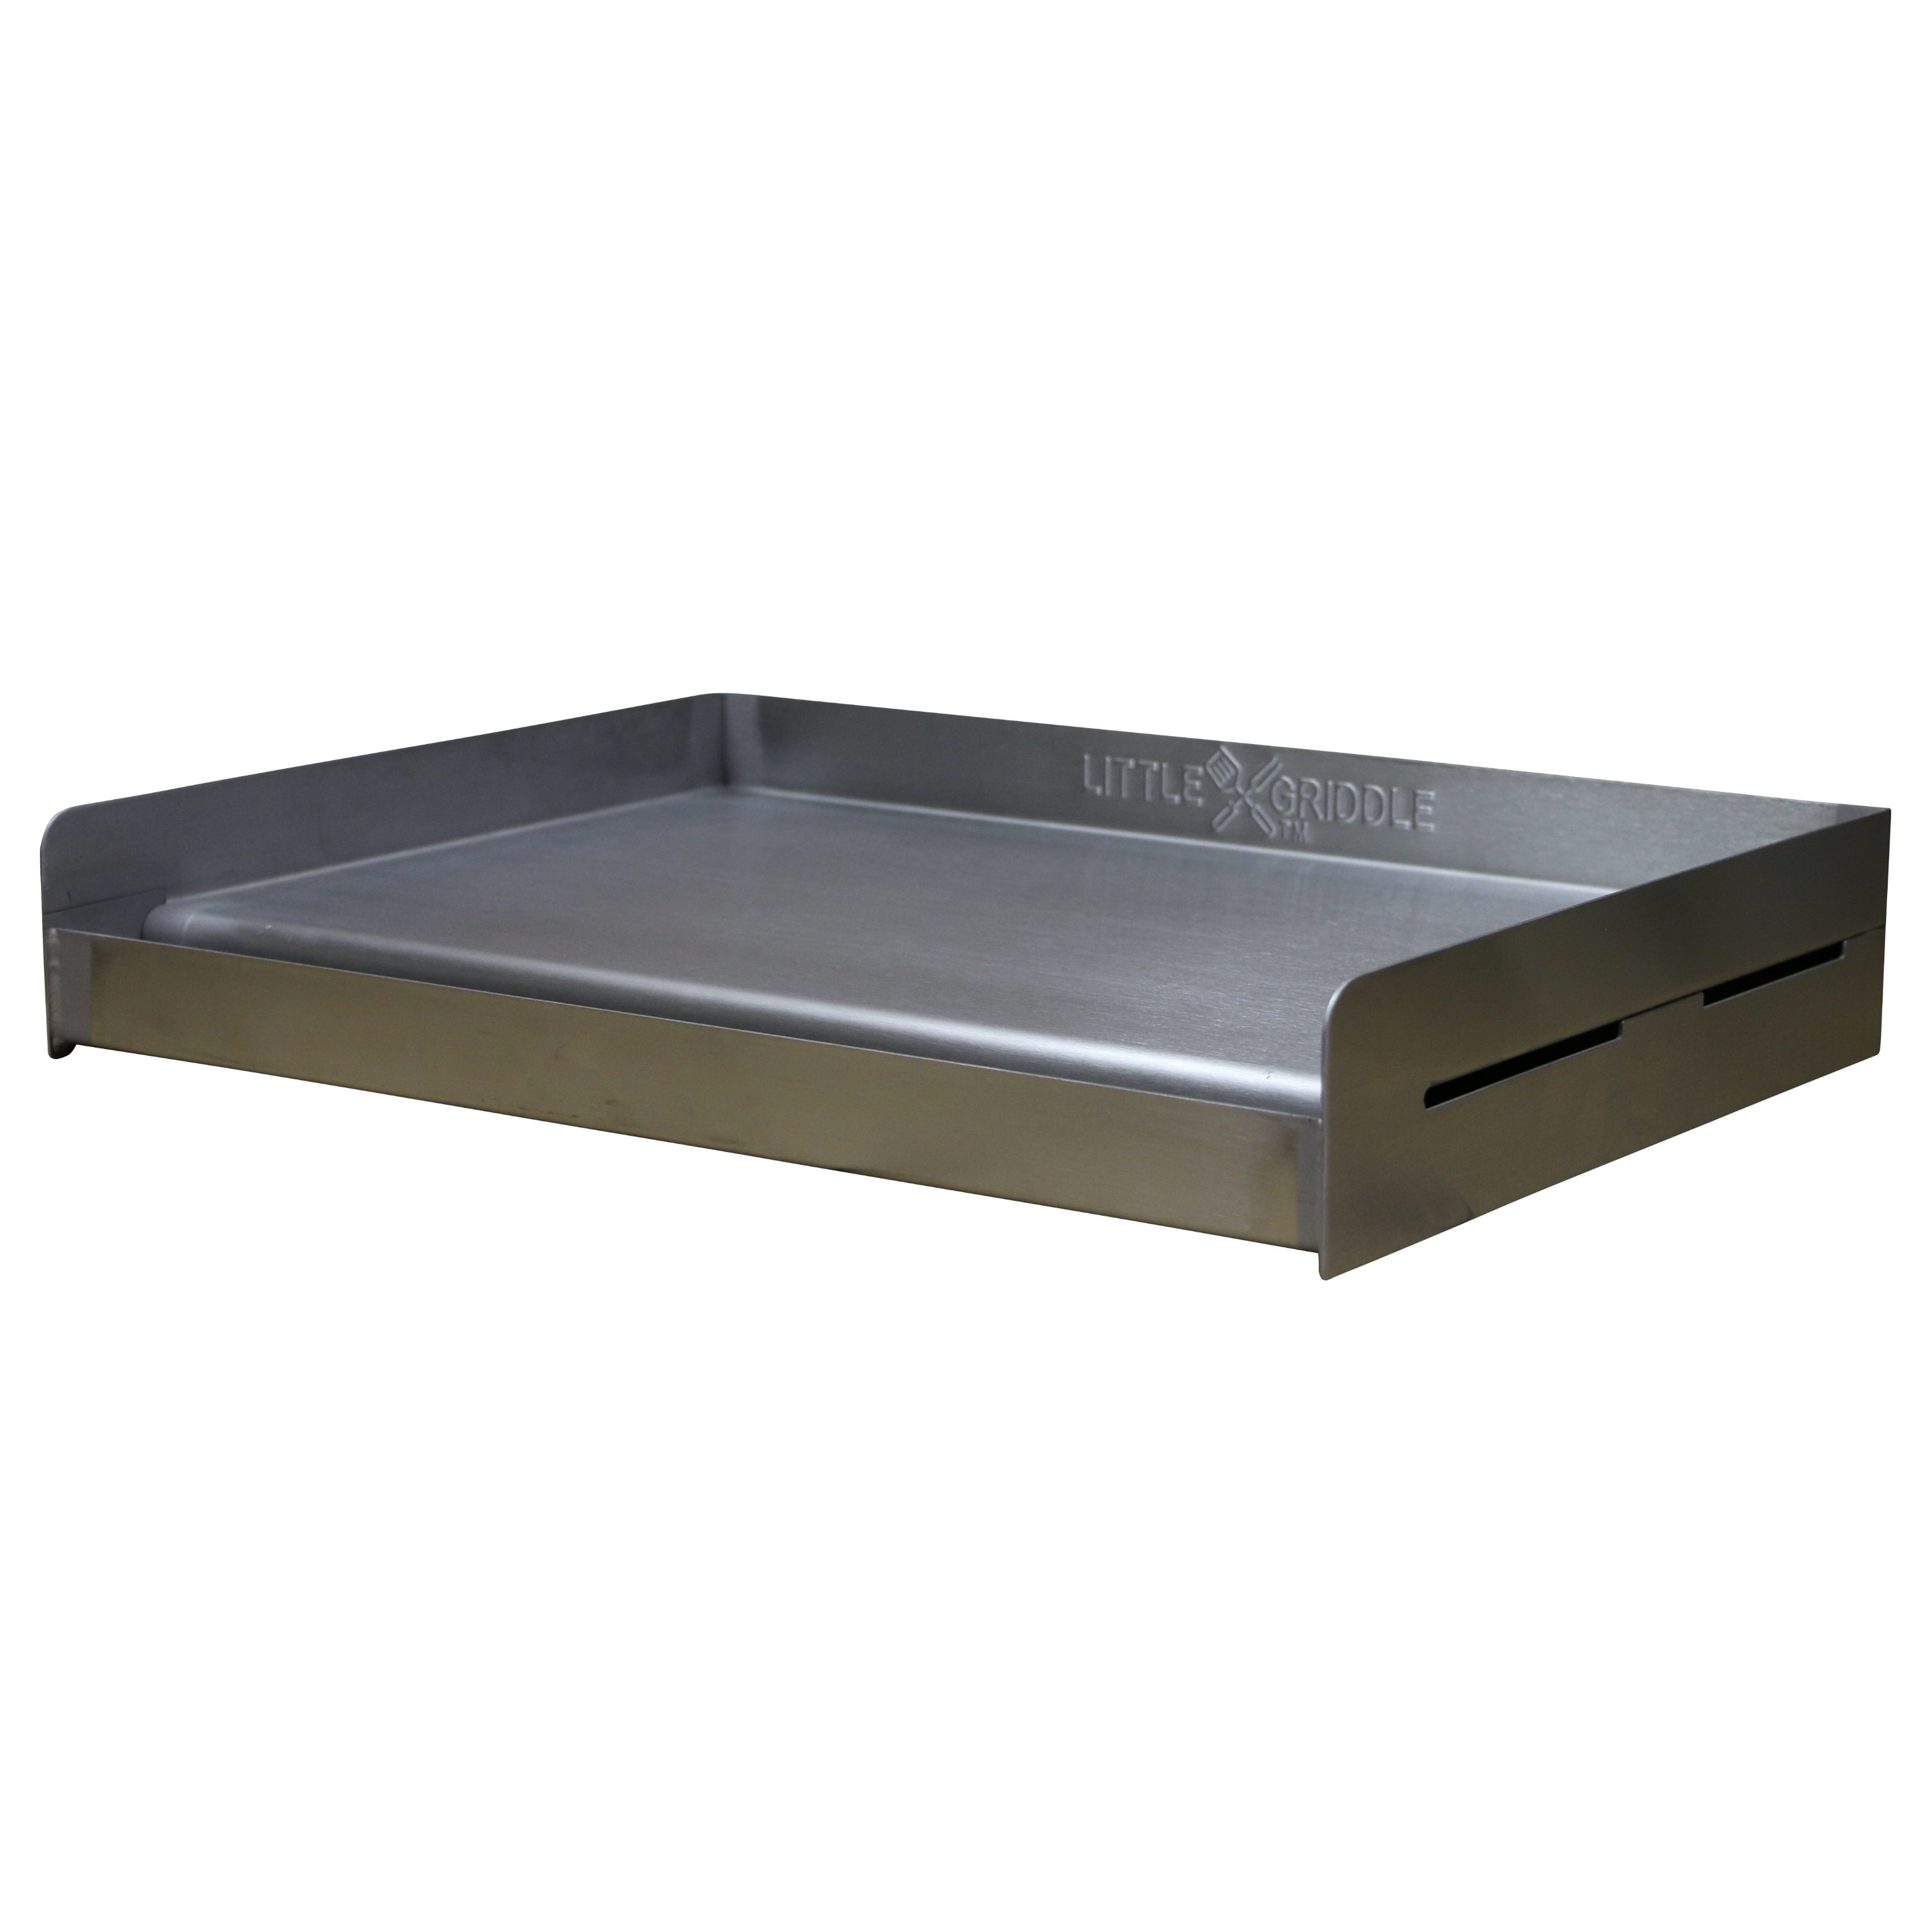 Little Griddle SQ-180 Sizzle-Q Stainless Steel Universal BBQ Griddle